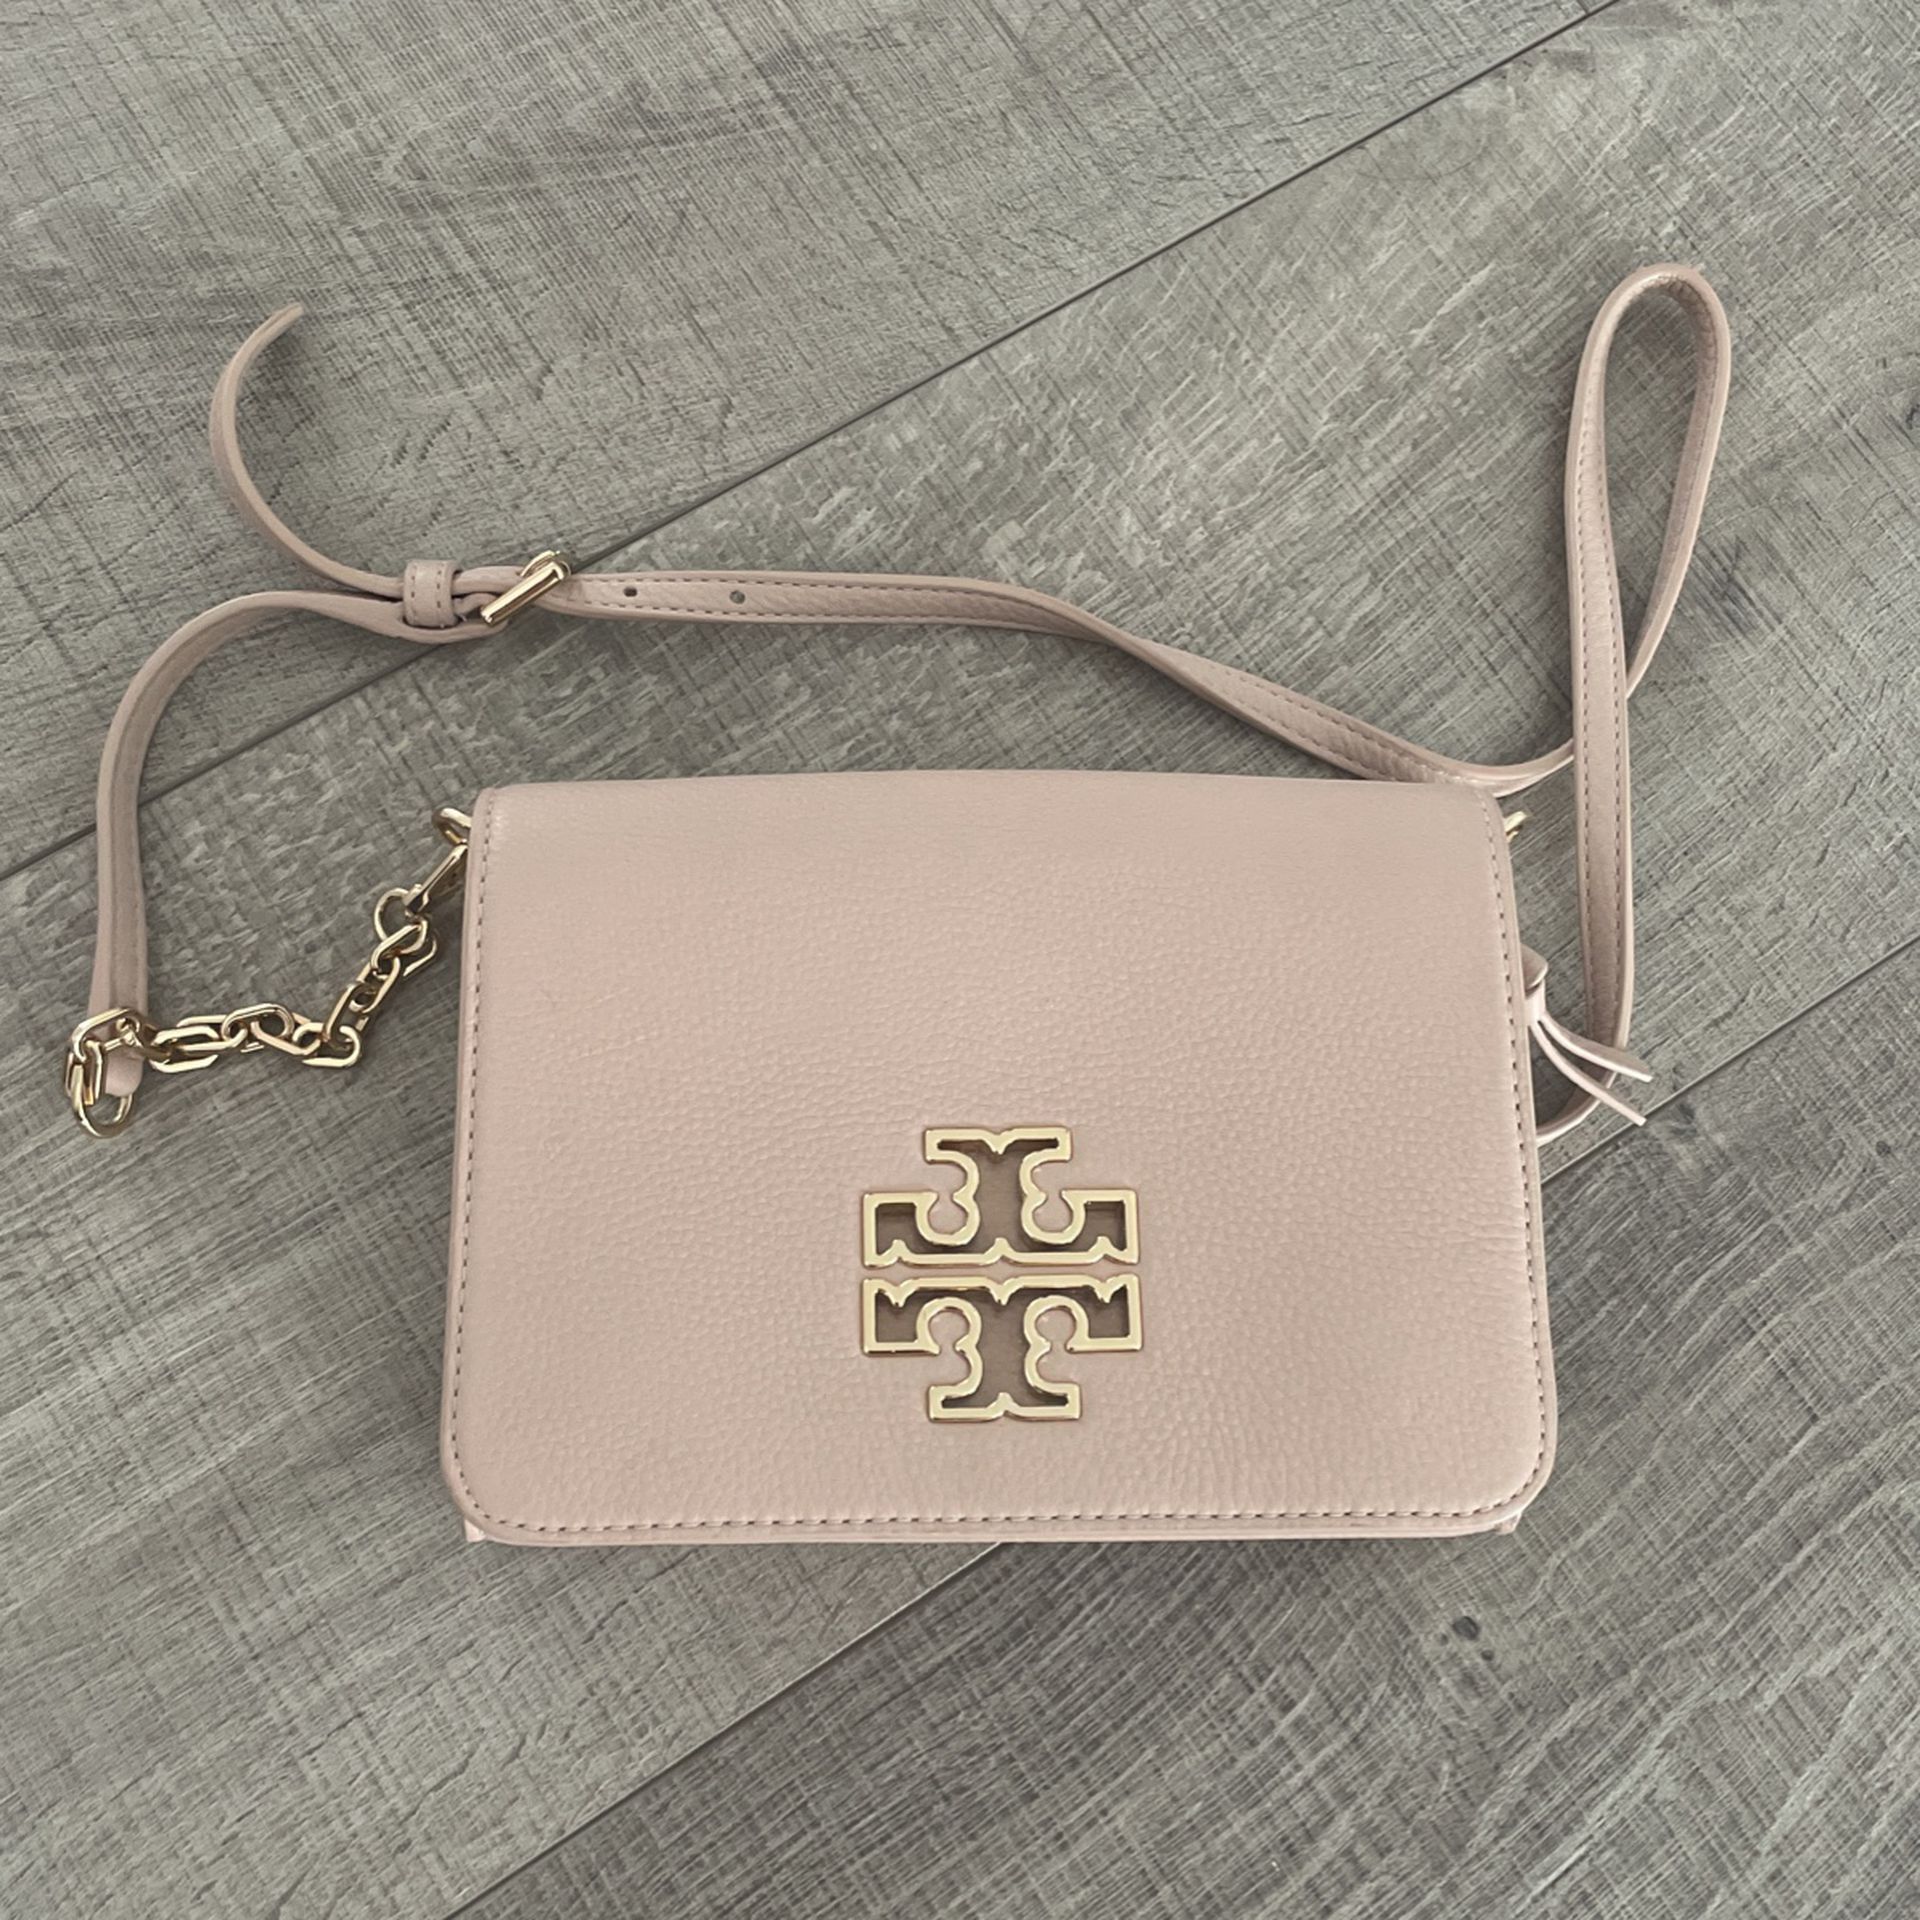 Tory Burch Purse for Sale in Itasca, IL - OfferUp